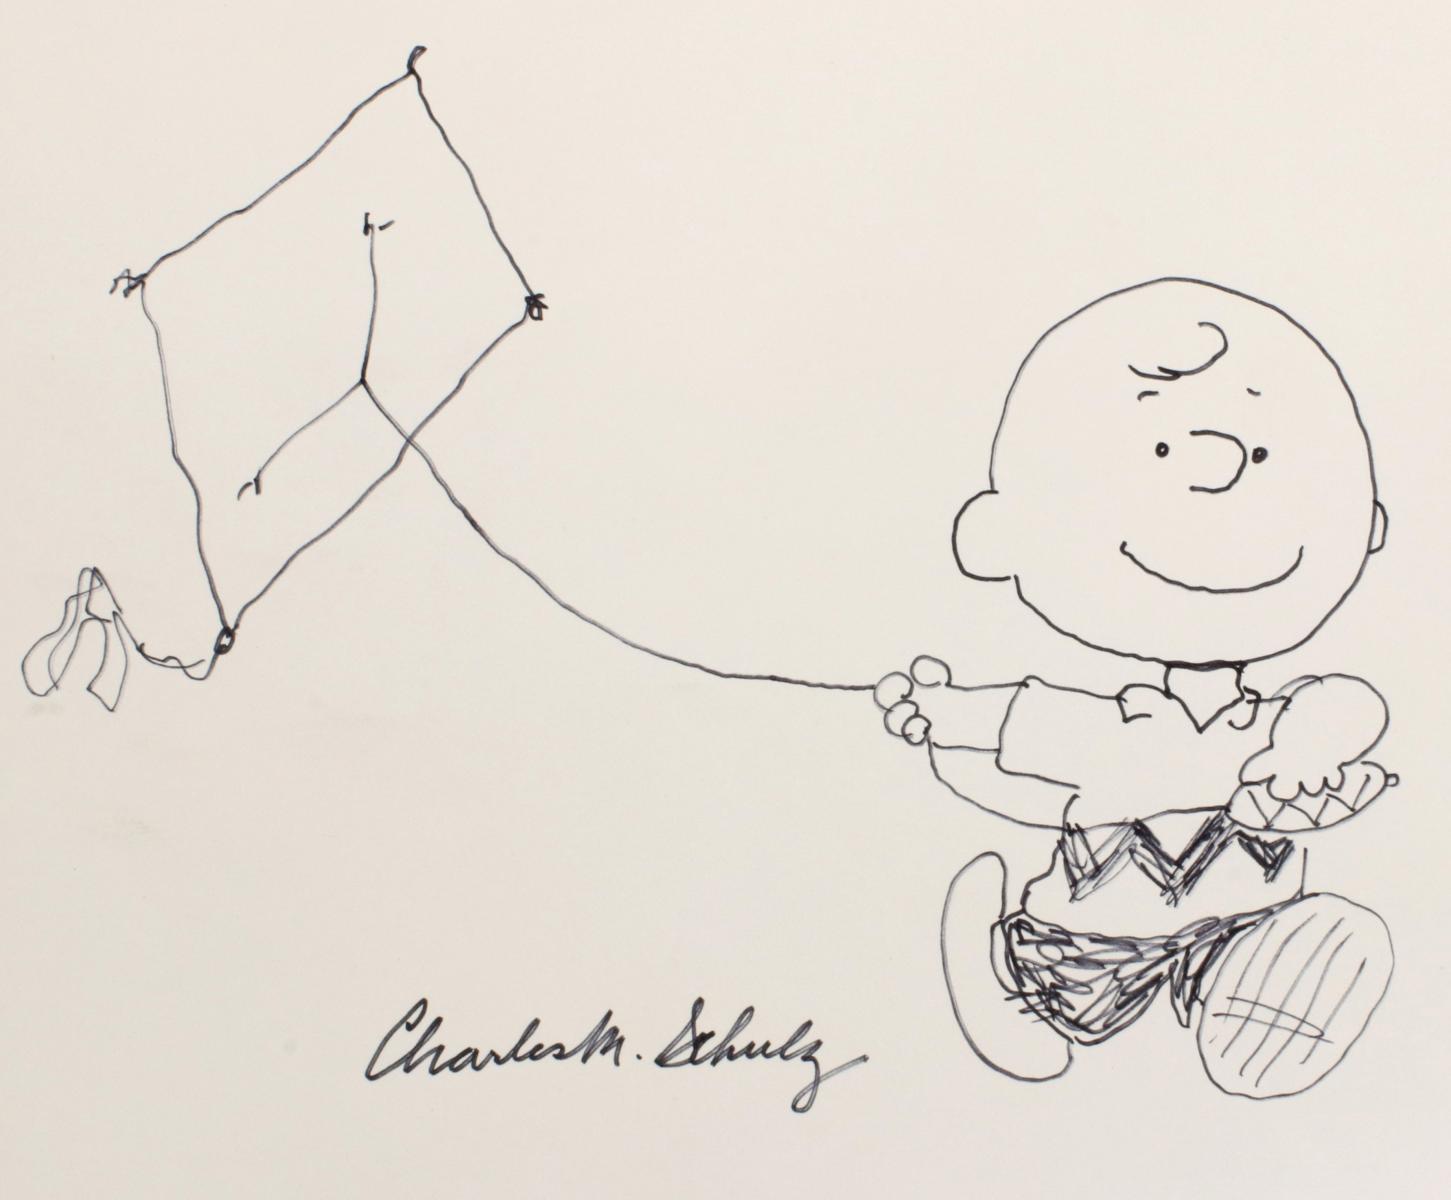 CHARLES M. SCHULZ (1922-2000) PEN AND INK